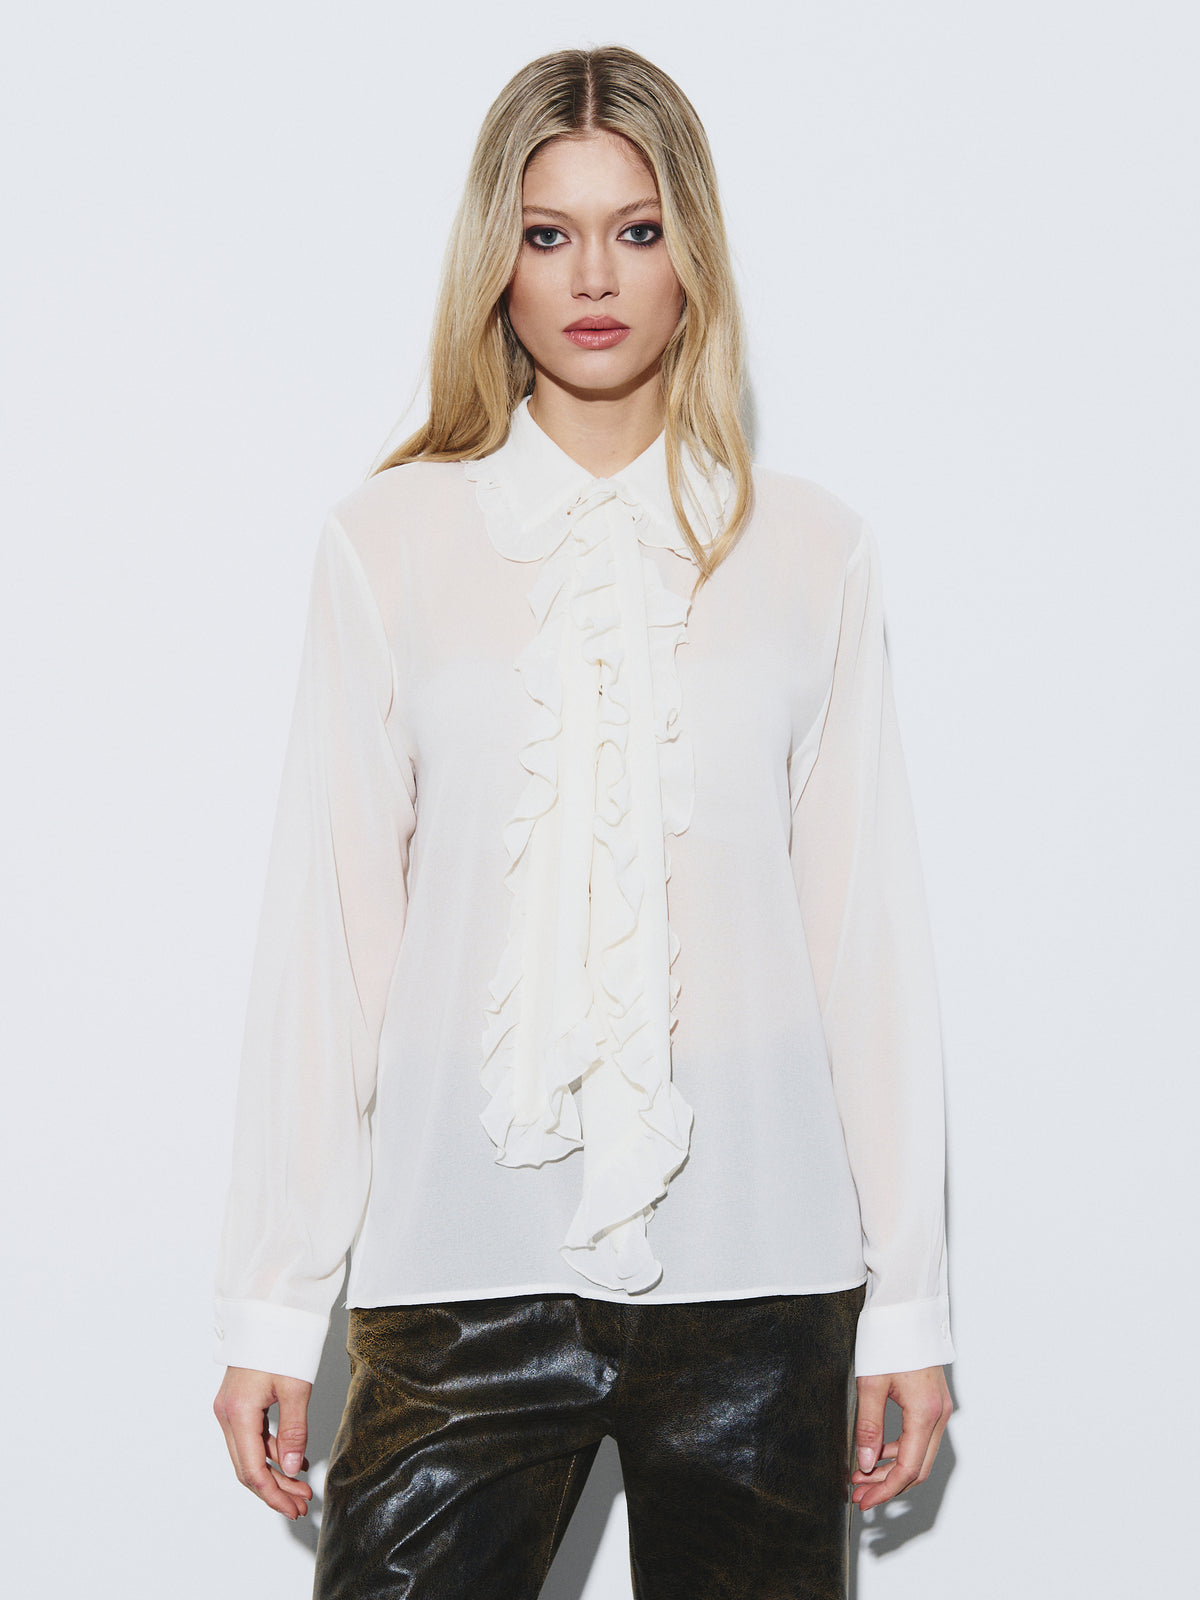 Front ruffle blouse